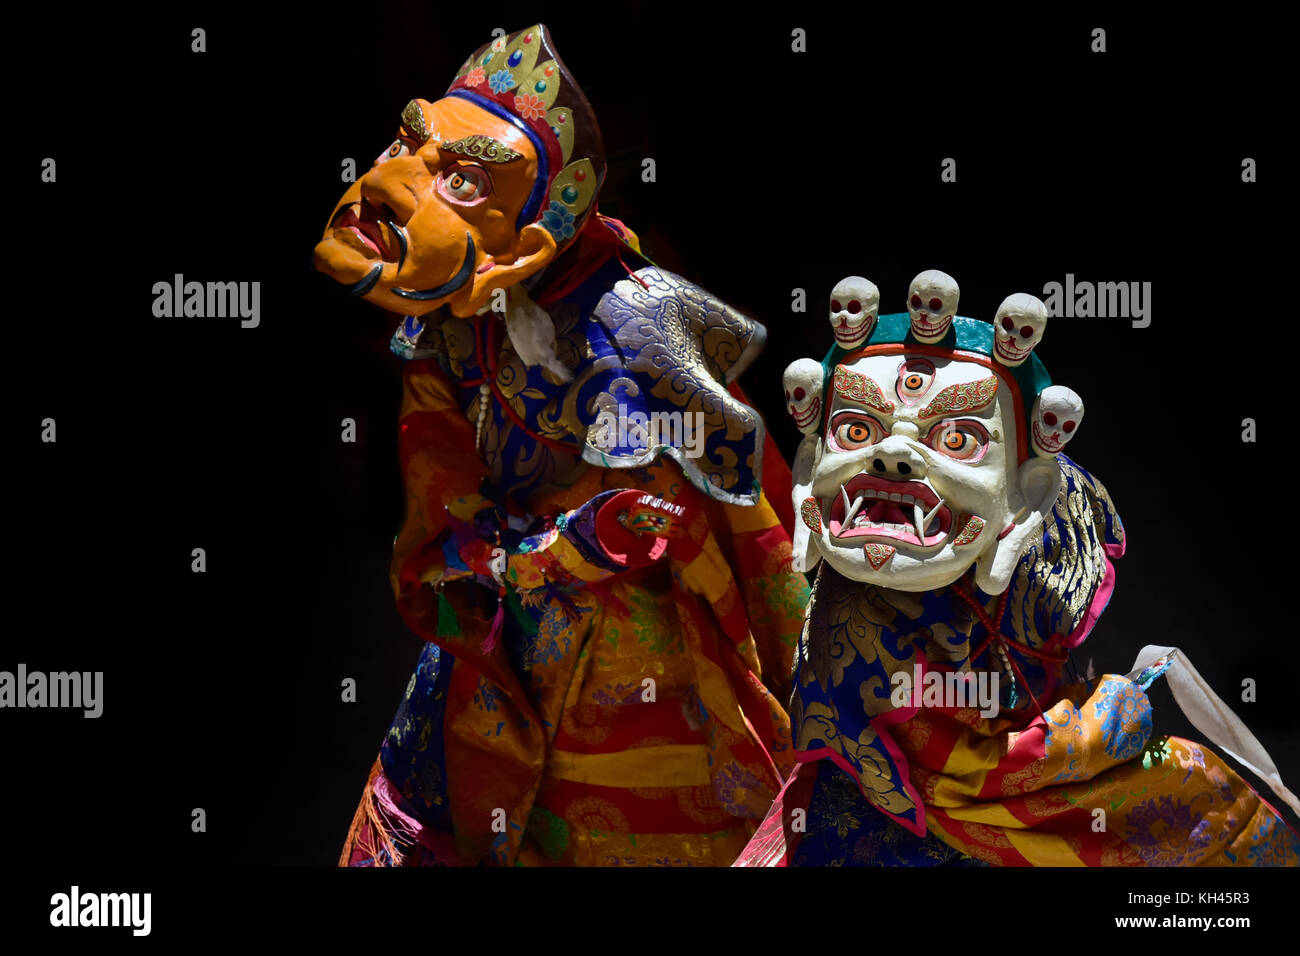 Lama dance in Masks, Cham Dance, yellow and white ancient masks and fine Tibetan clothes on a black background, Buddhist mystery, Ladakh, Himalayas. Stock Photo